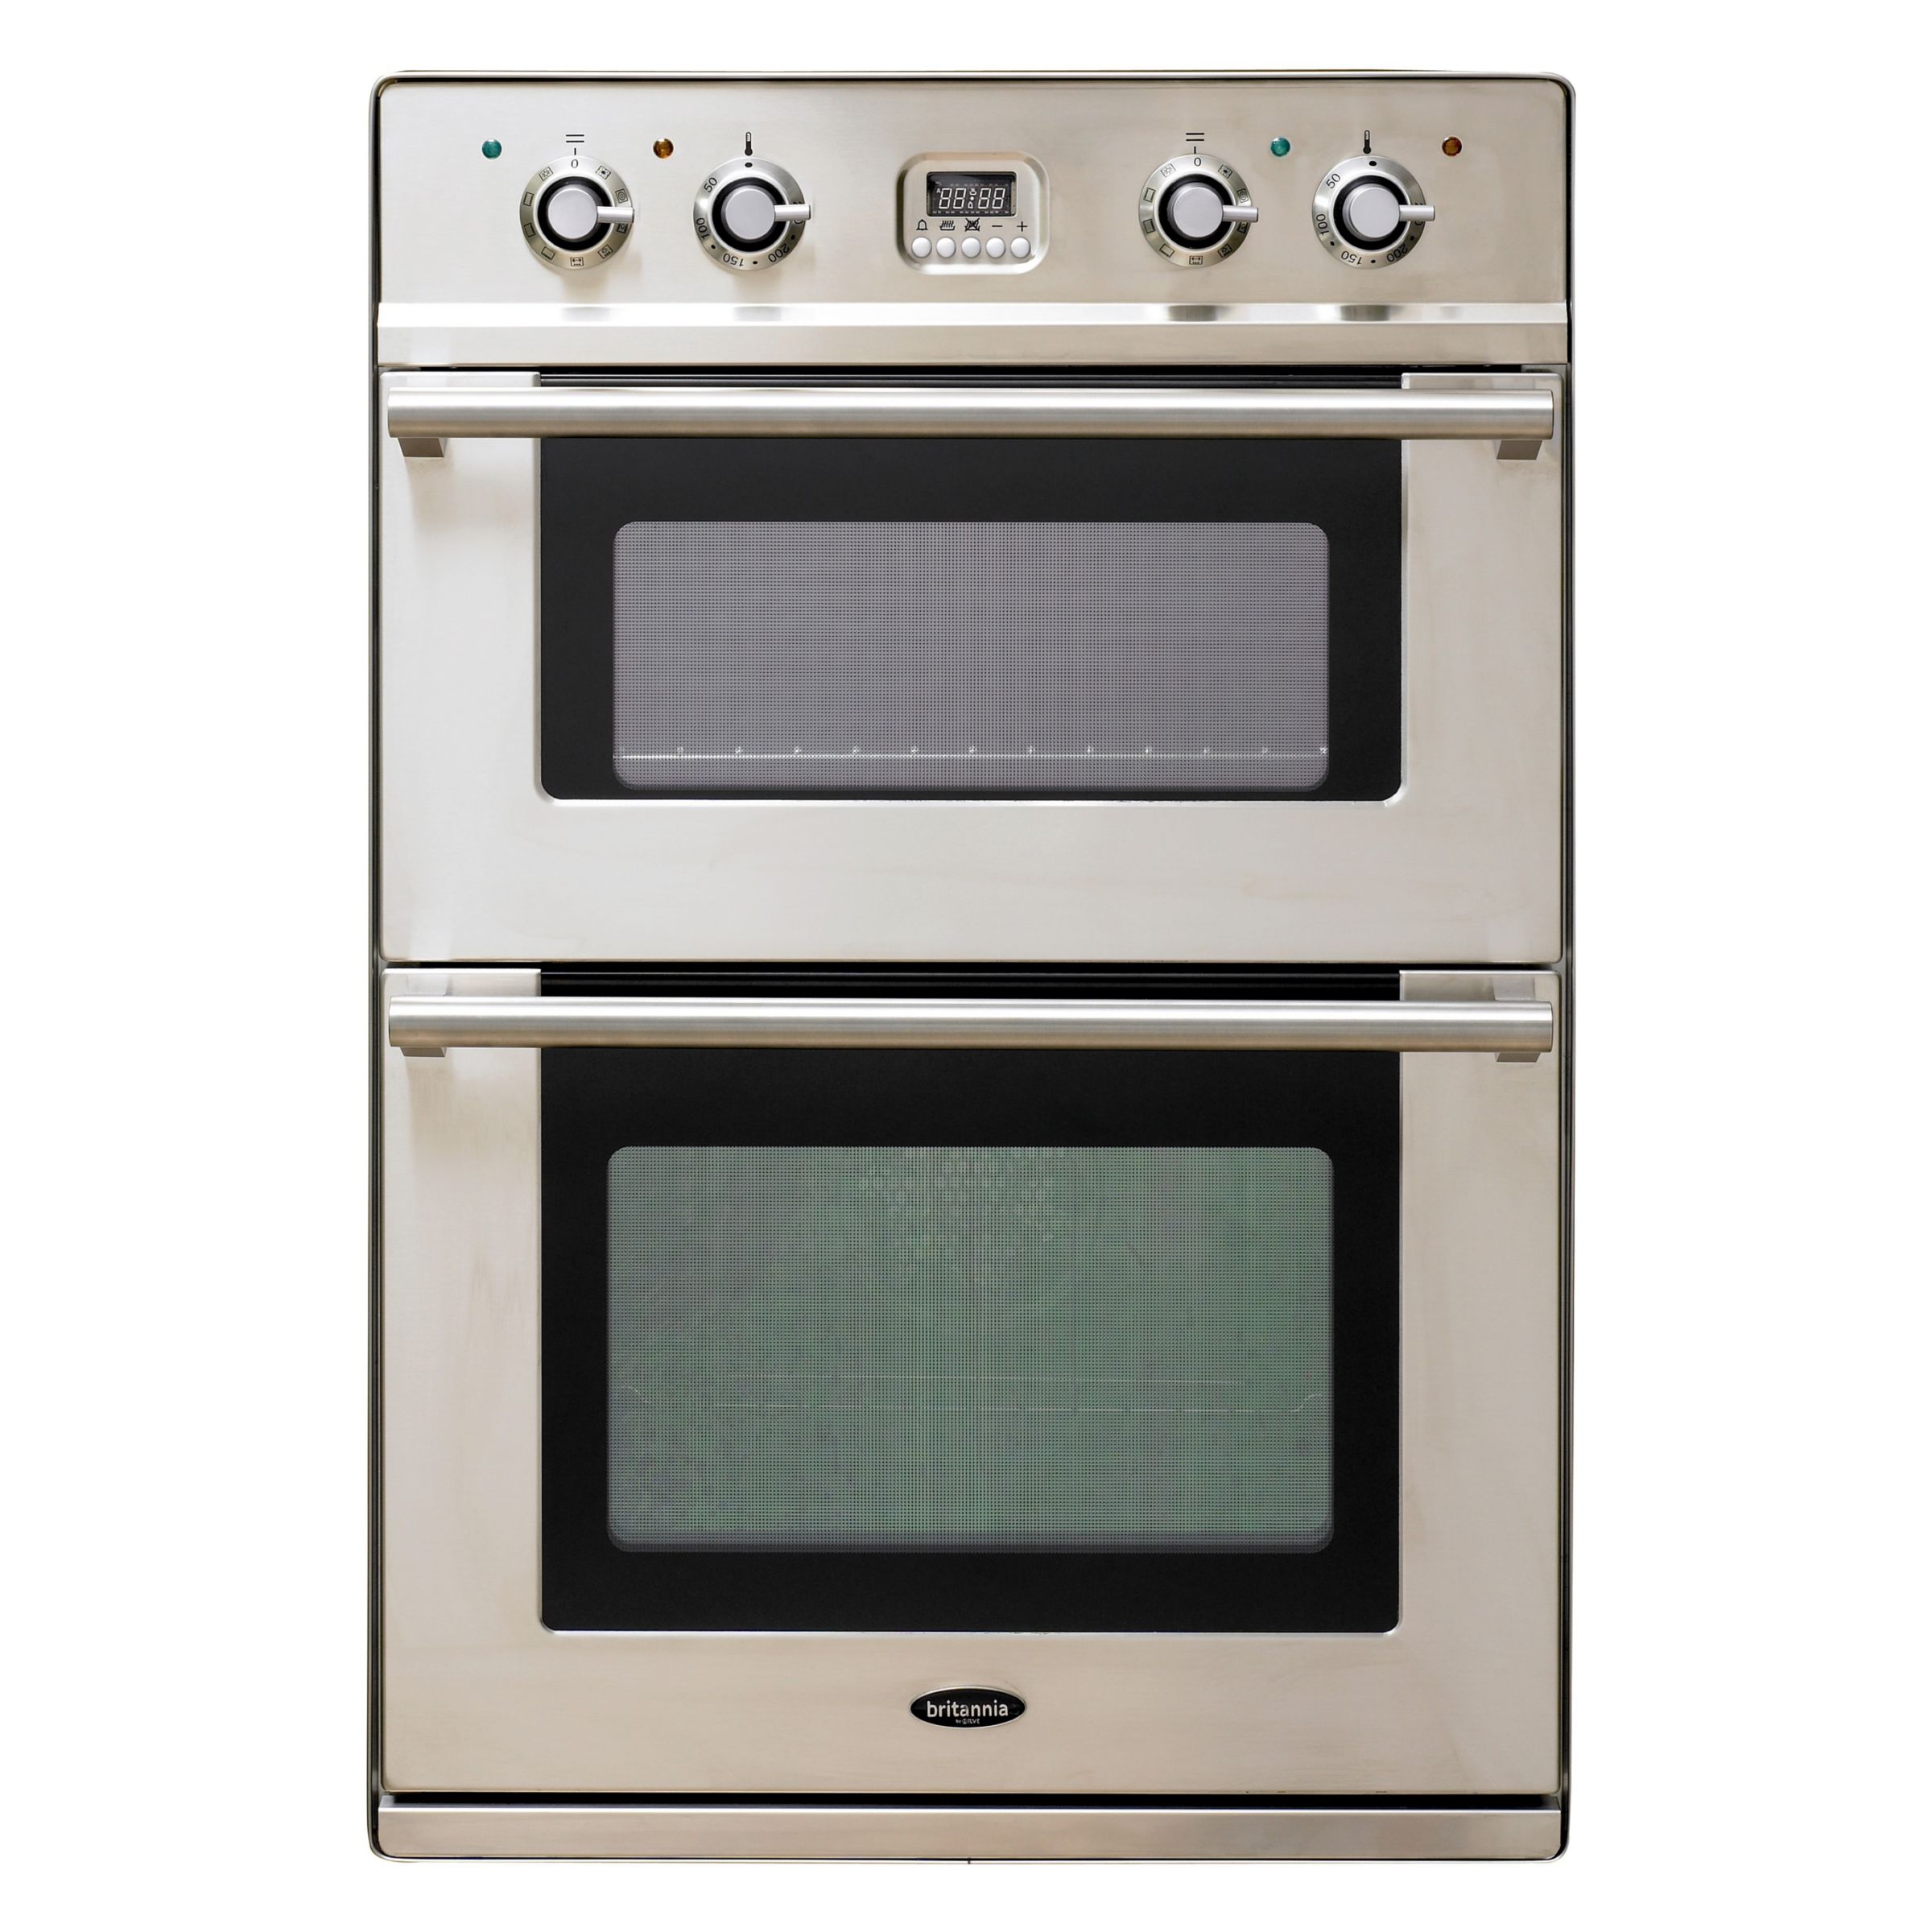 Britannia OV-201LMP-SS Double Electric Oven, Stainless Steel at John Lewis